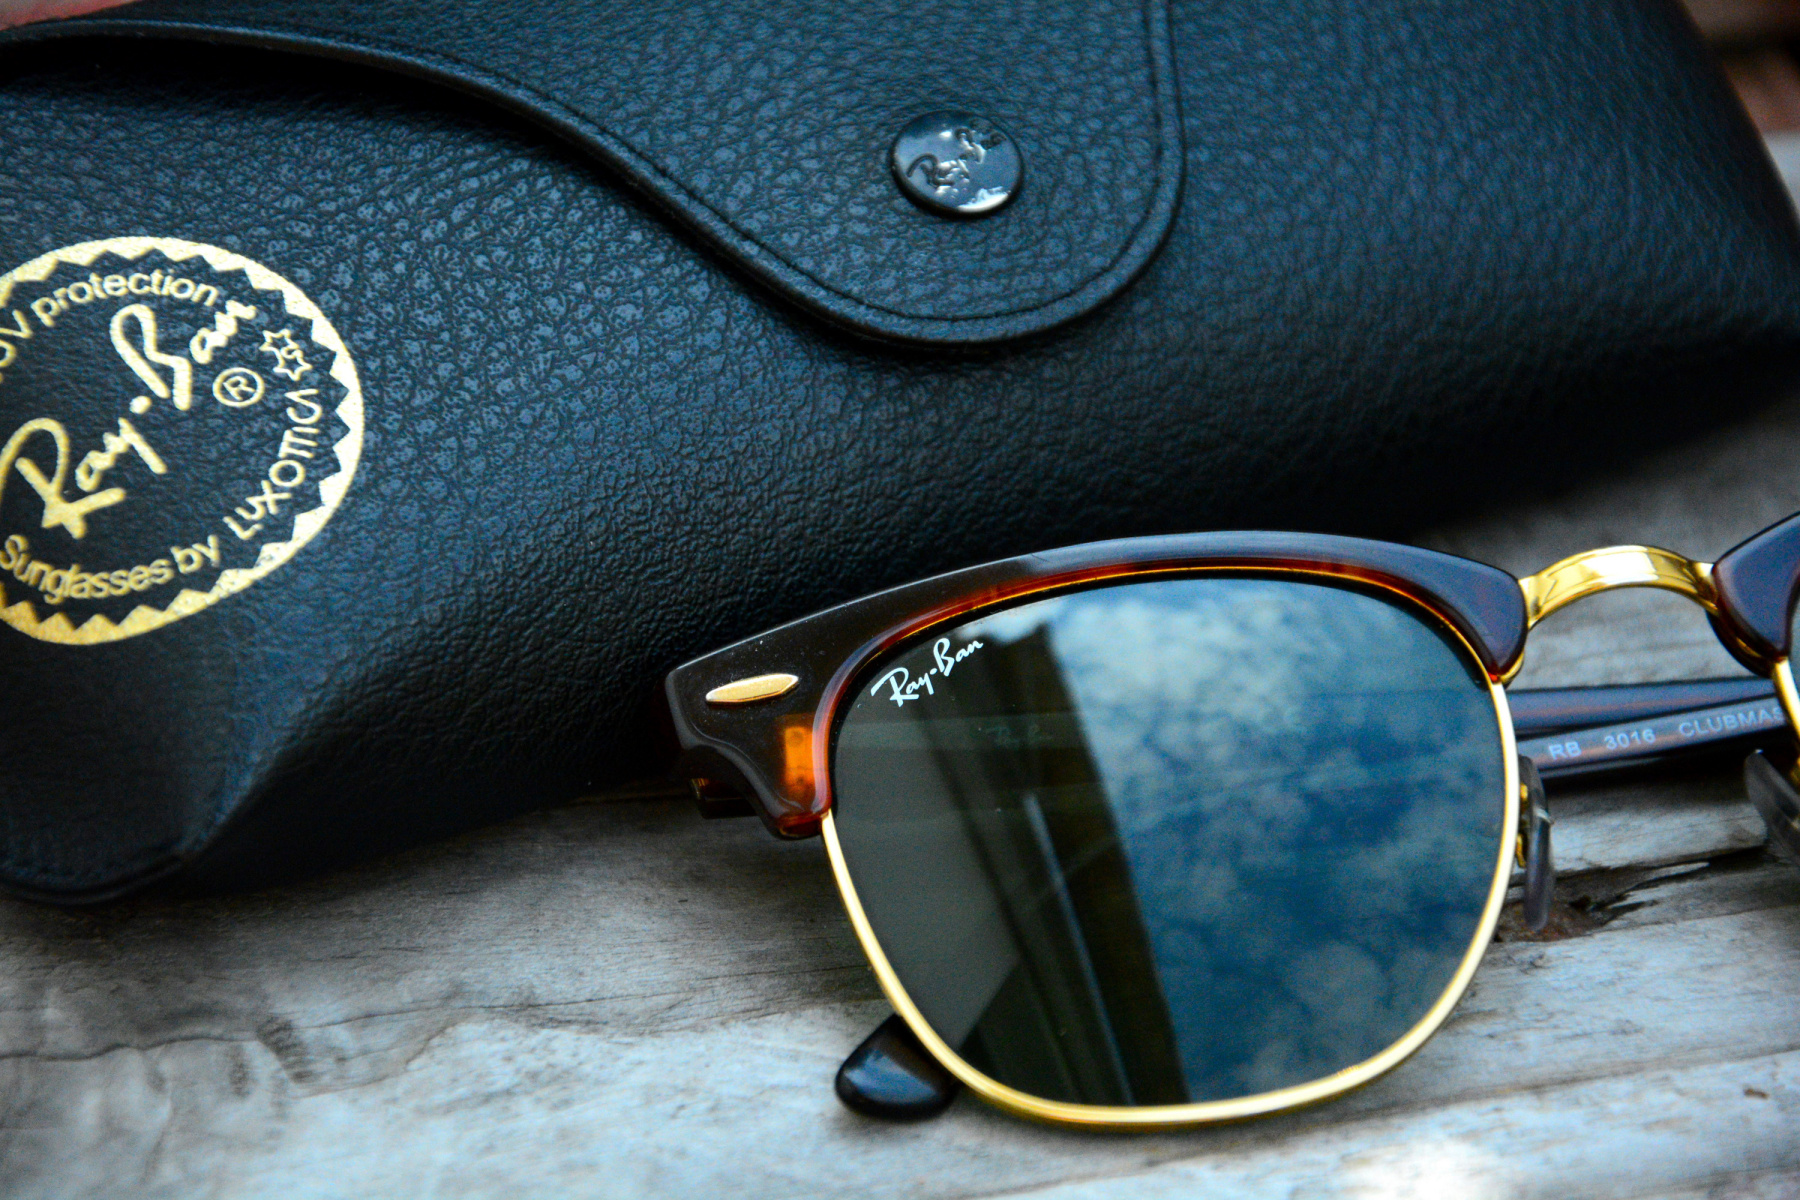 first ray ban sunglasses